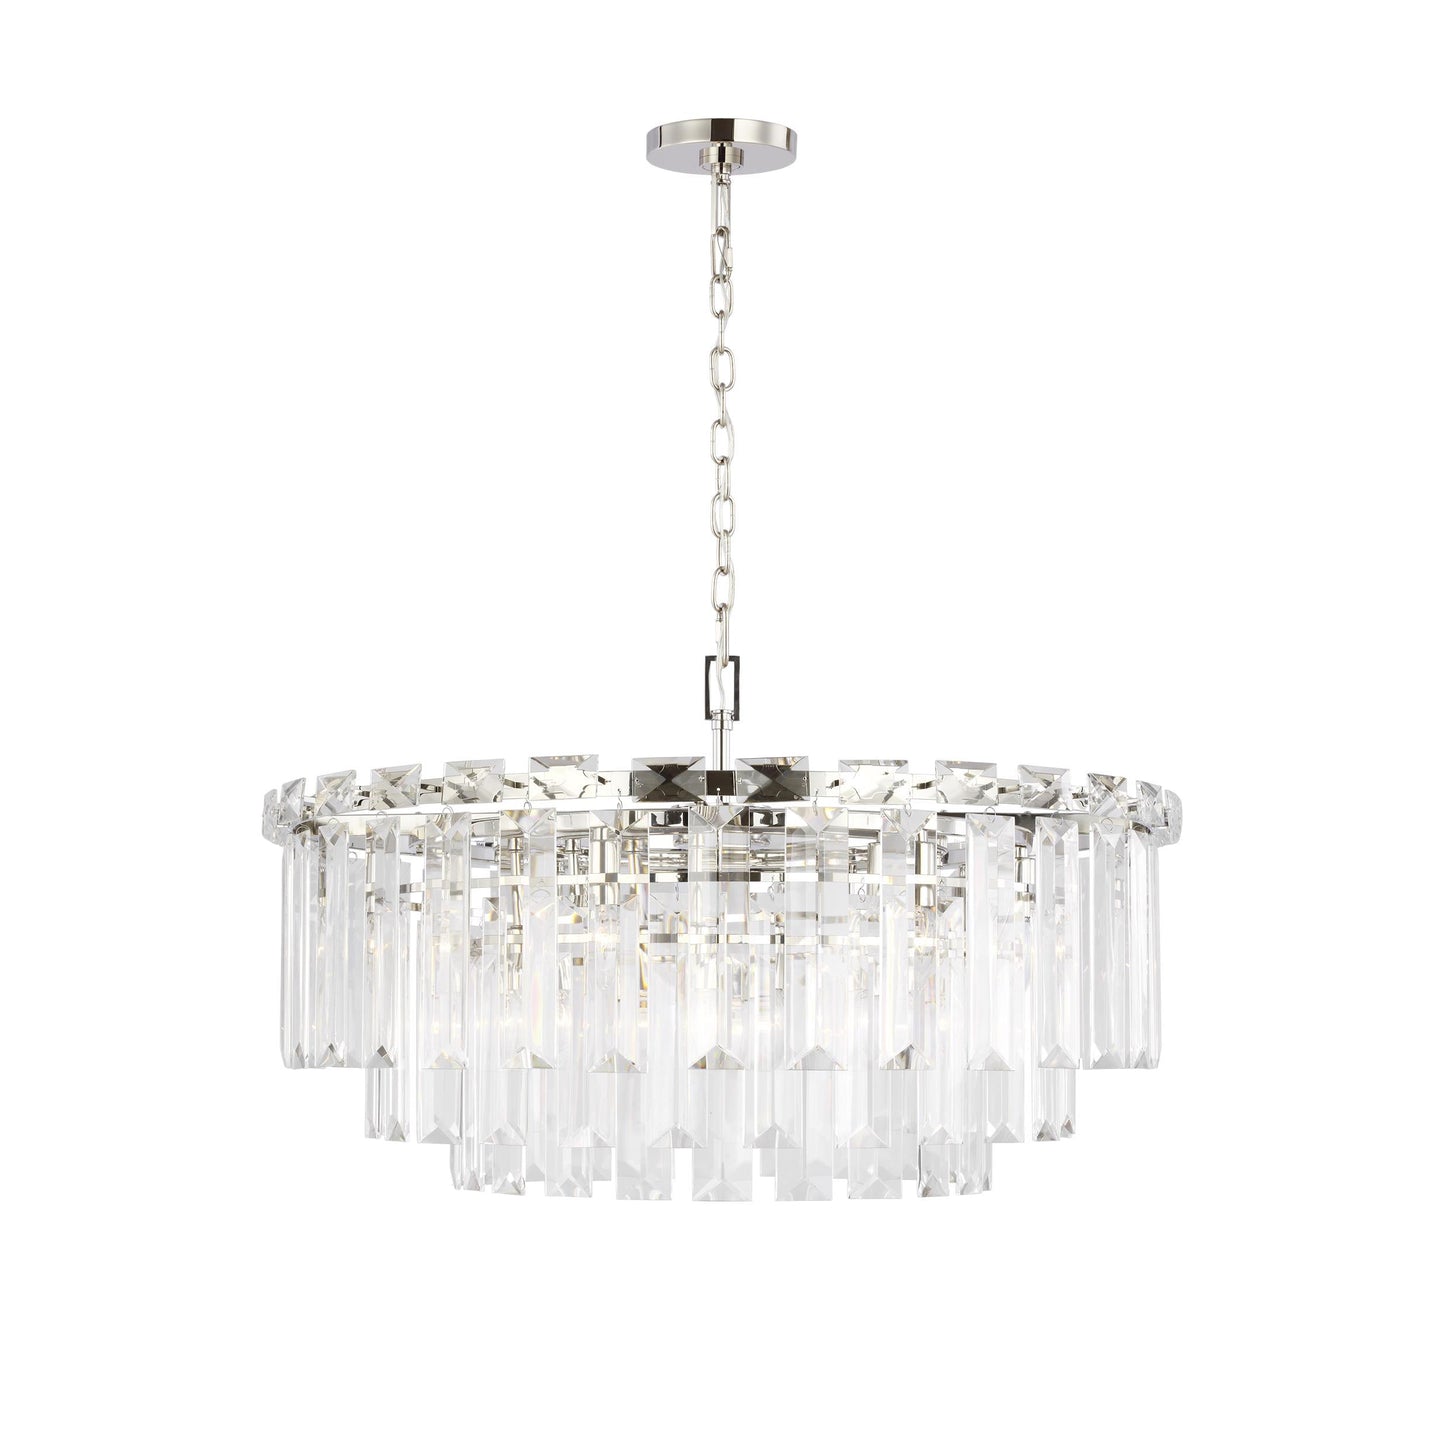 Chapman and Myers Arden Chandelier